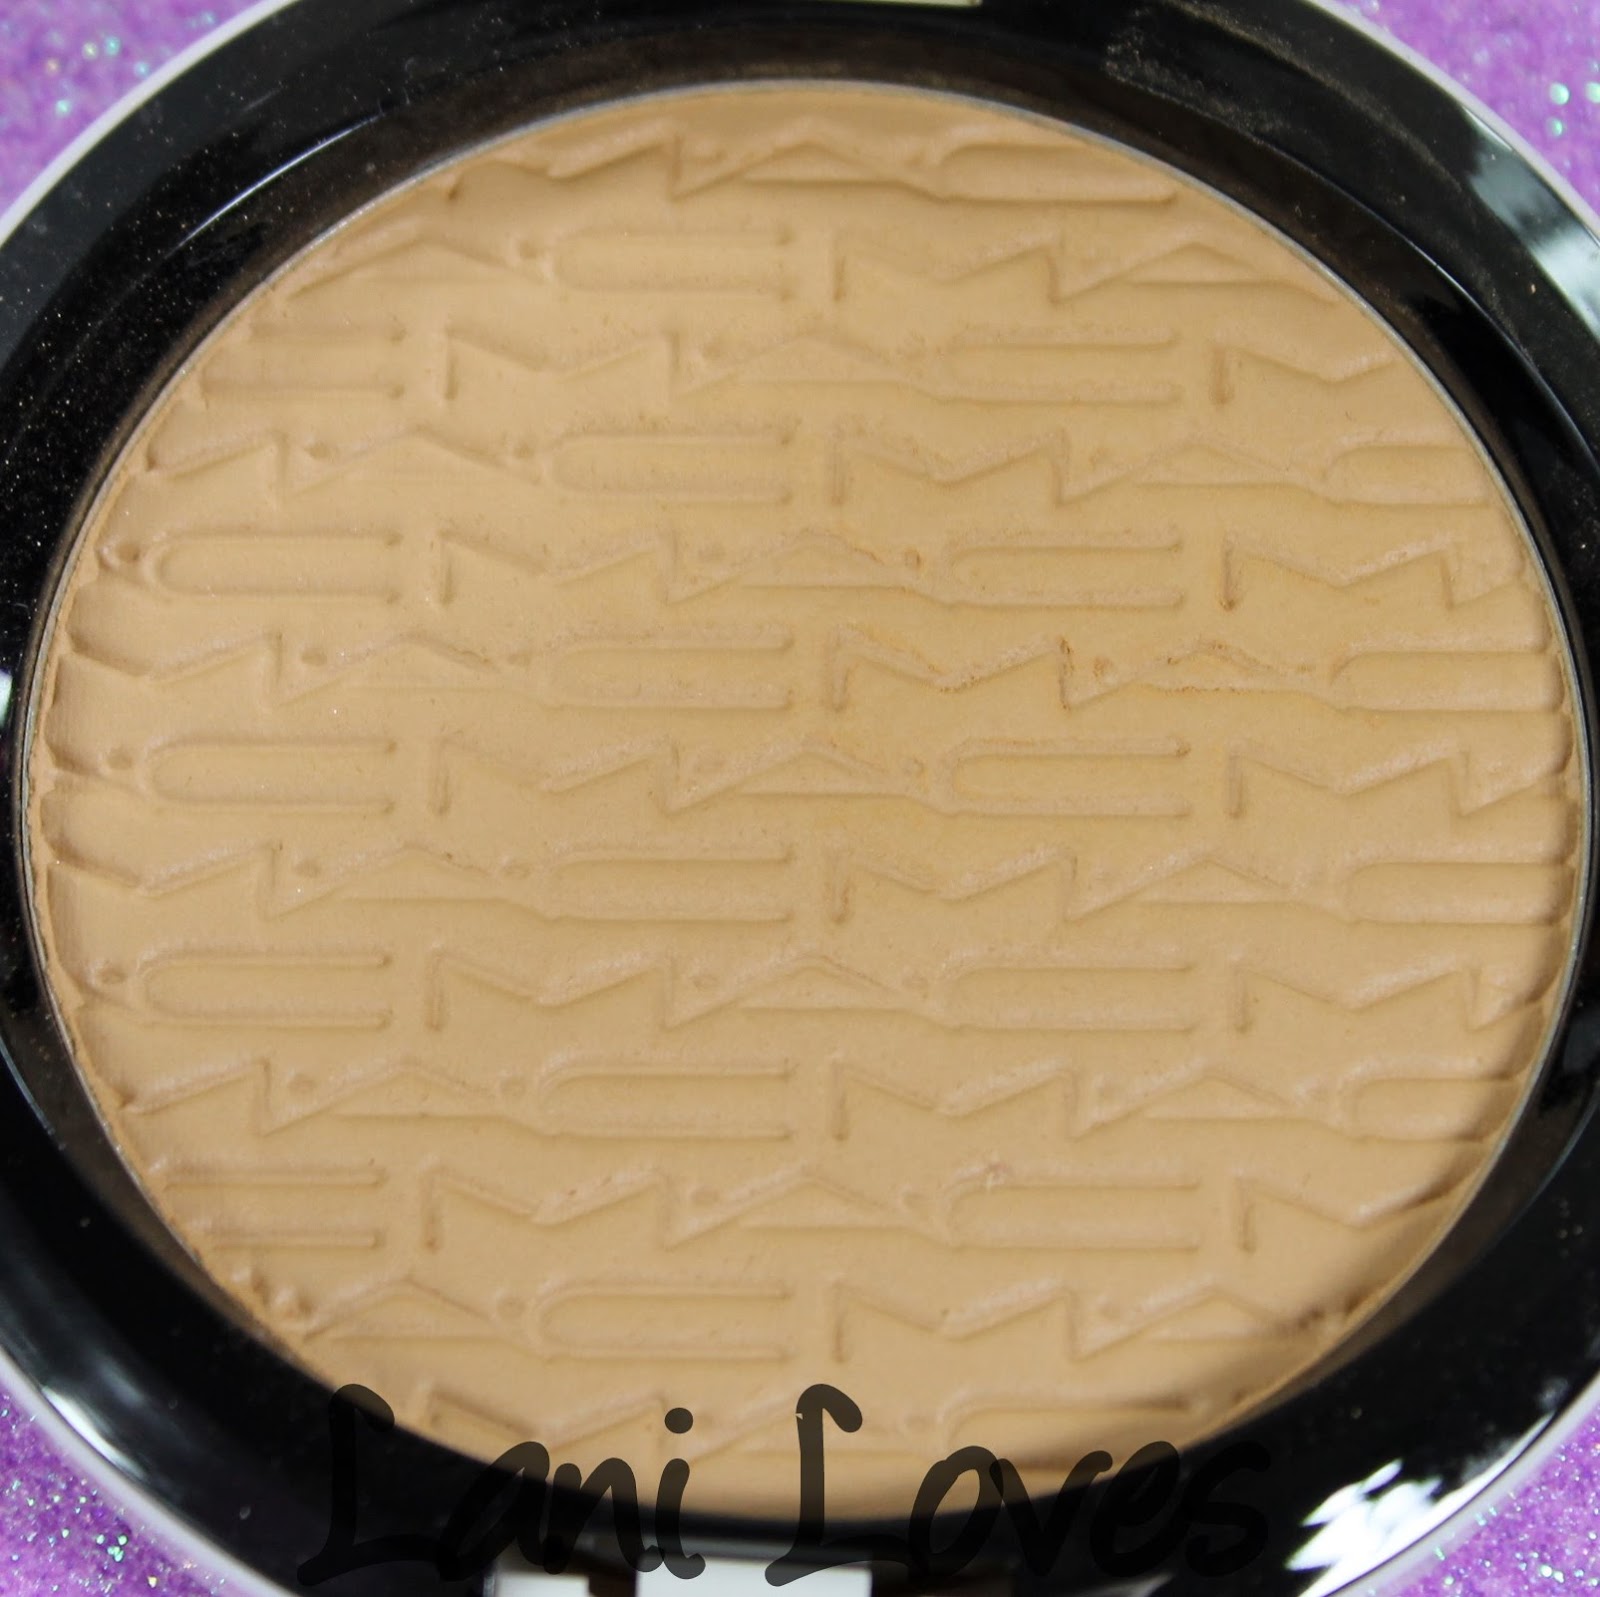 MAC Monday: Surf Baby - Gold-Go-Lightly Studio Careblend Pressed Powder Swatches & Review